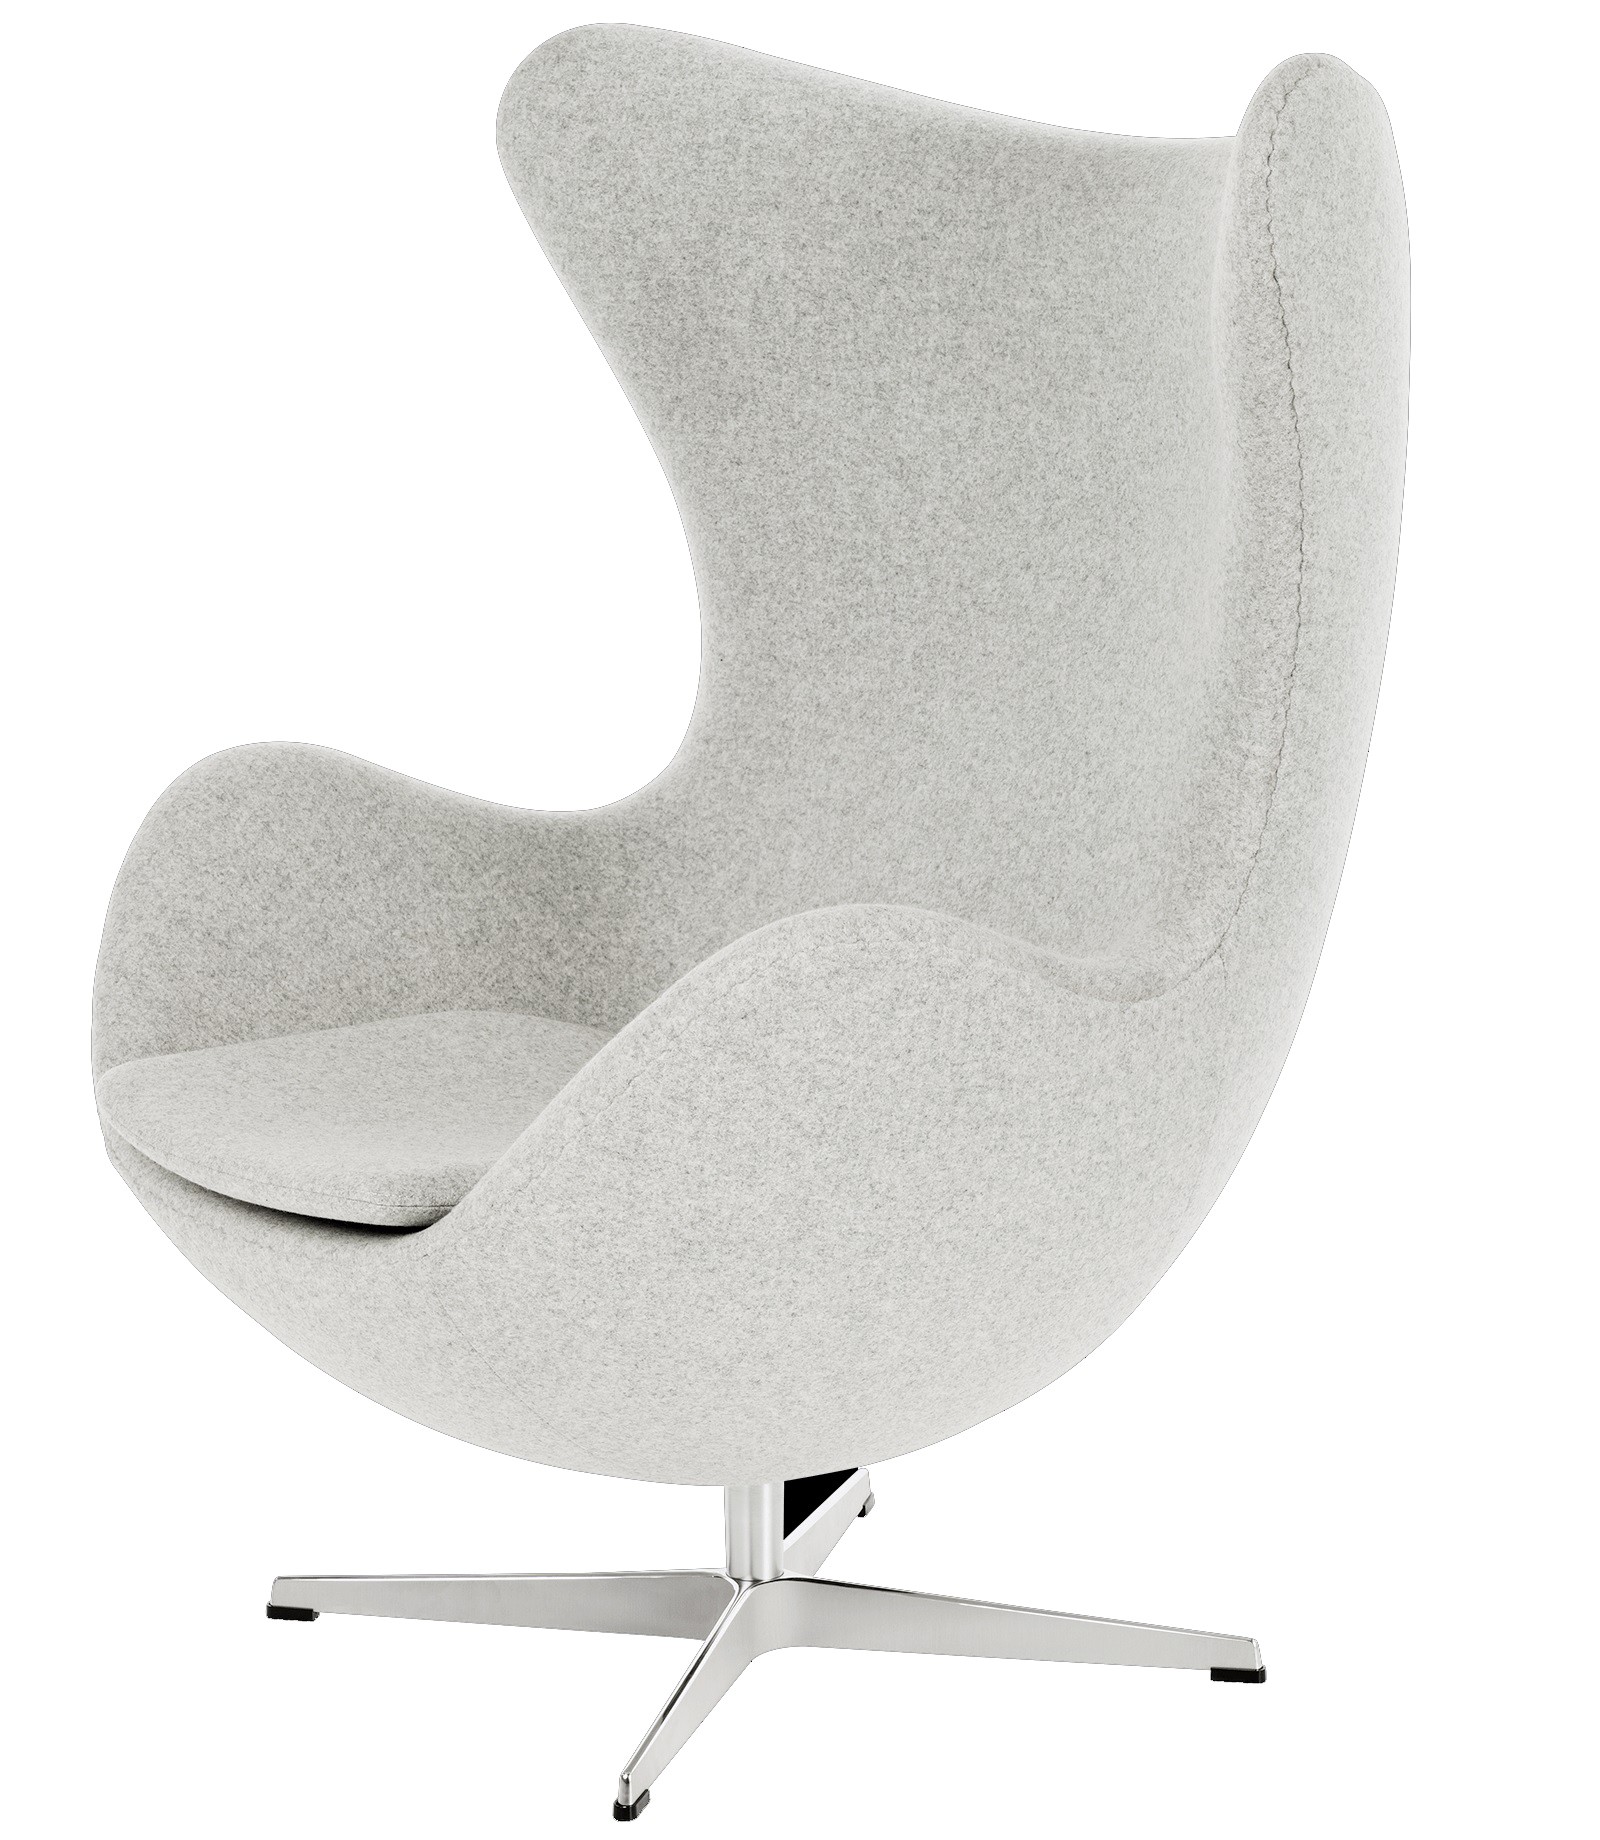 Egg Chair Jacobsen - Egg Chair 3316 Arne Jacobsen Replica / Arne jacobsen designed both the egg chair and the swan armchair in 1958 for the lobby and lounge area of in 1958 the swan and the egg chair were a technologically innovatives.